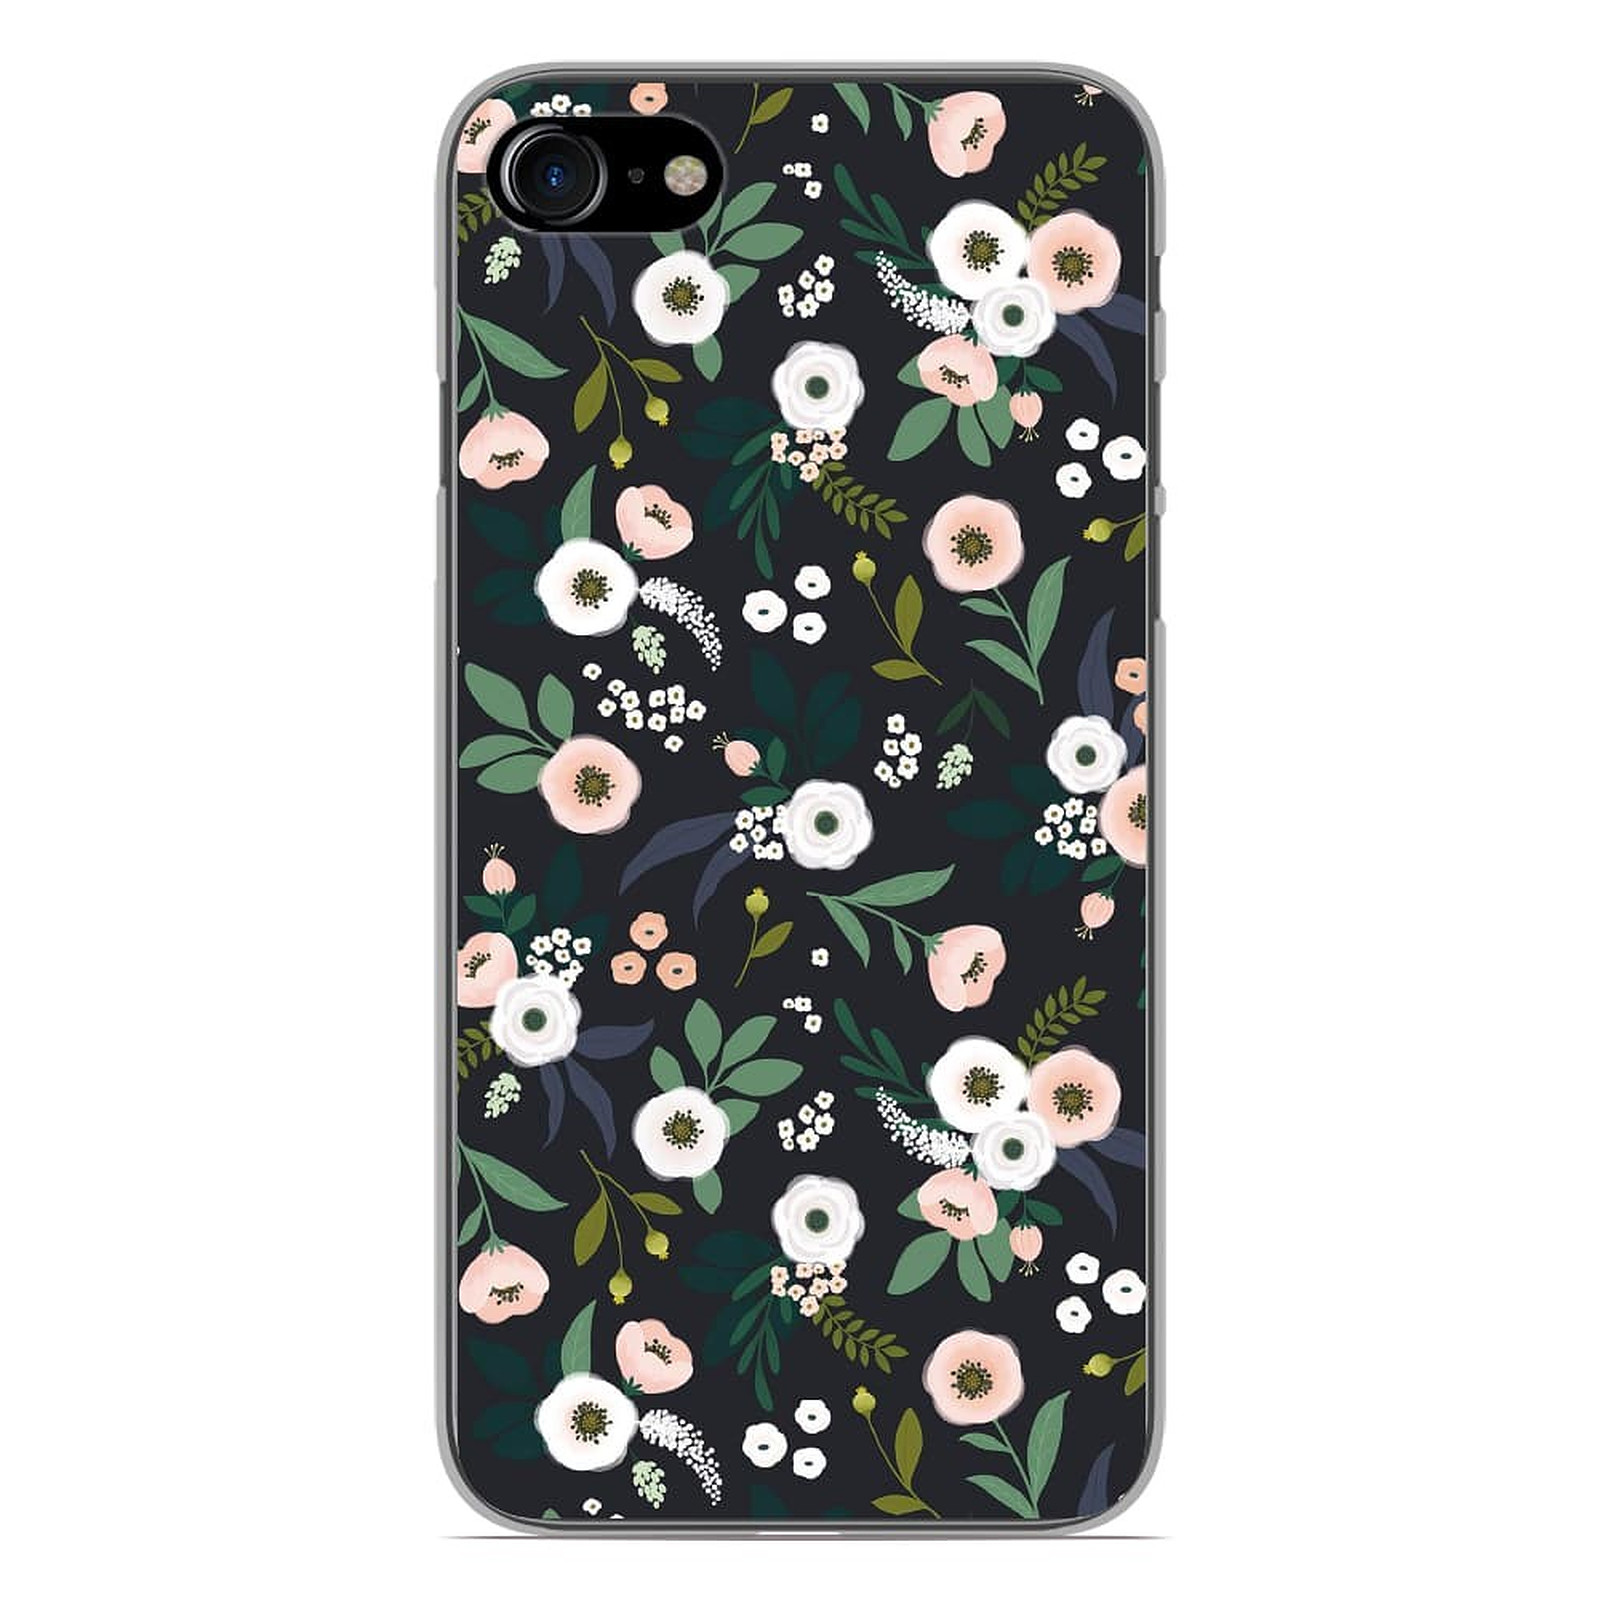 1001 Coques Coque silicone gel Apple iPhone 7 motif Flowers Noir - Coque telephone 1001Coques